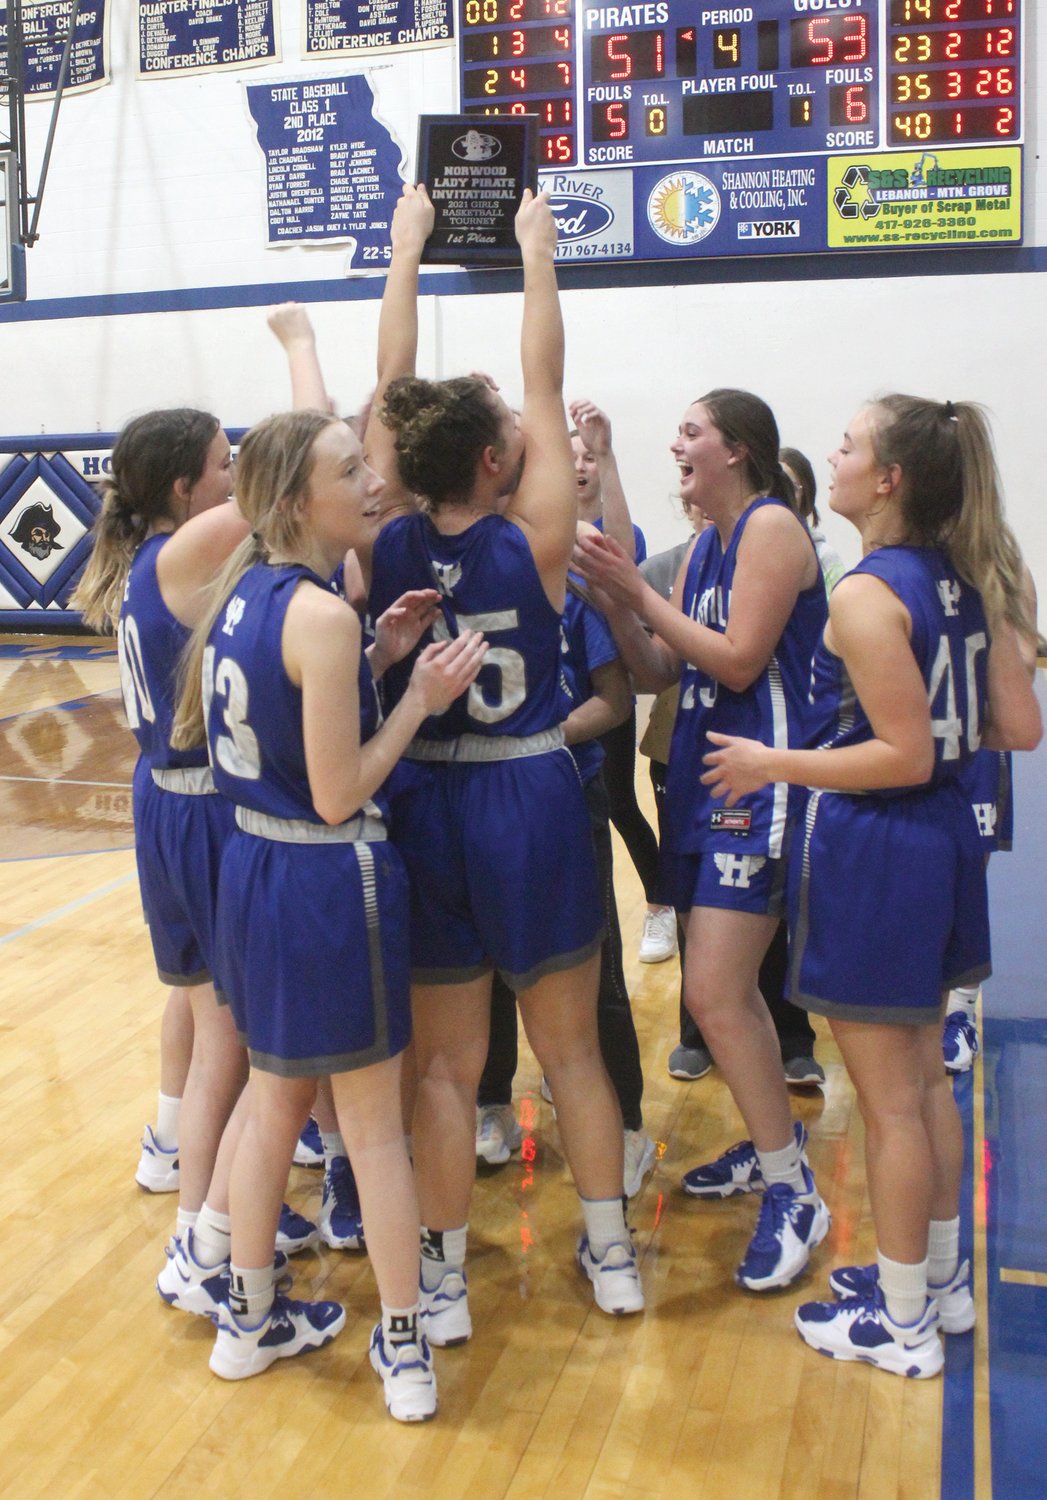 The Hartville Lady Eagles basketball team won a tournament championship last week as a total of six Wright County teams competed in two local tournaments. The Lady Eagles won the Norwood Lady Pirate Invitational title.